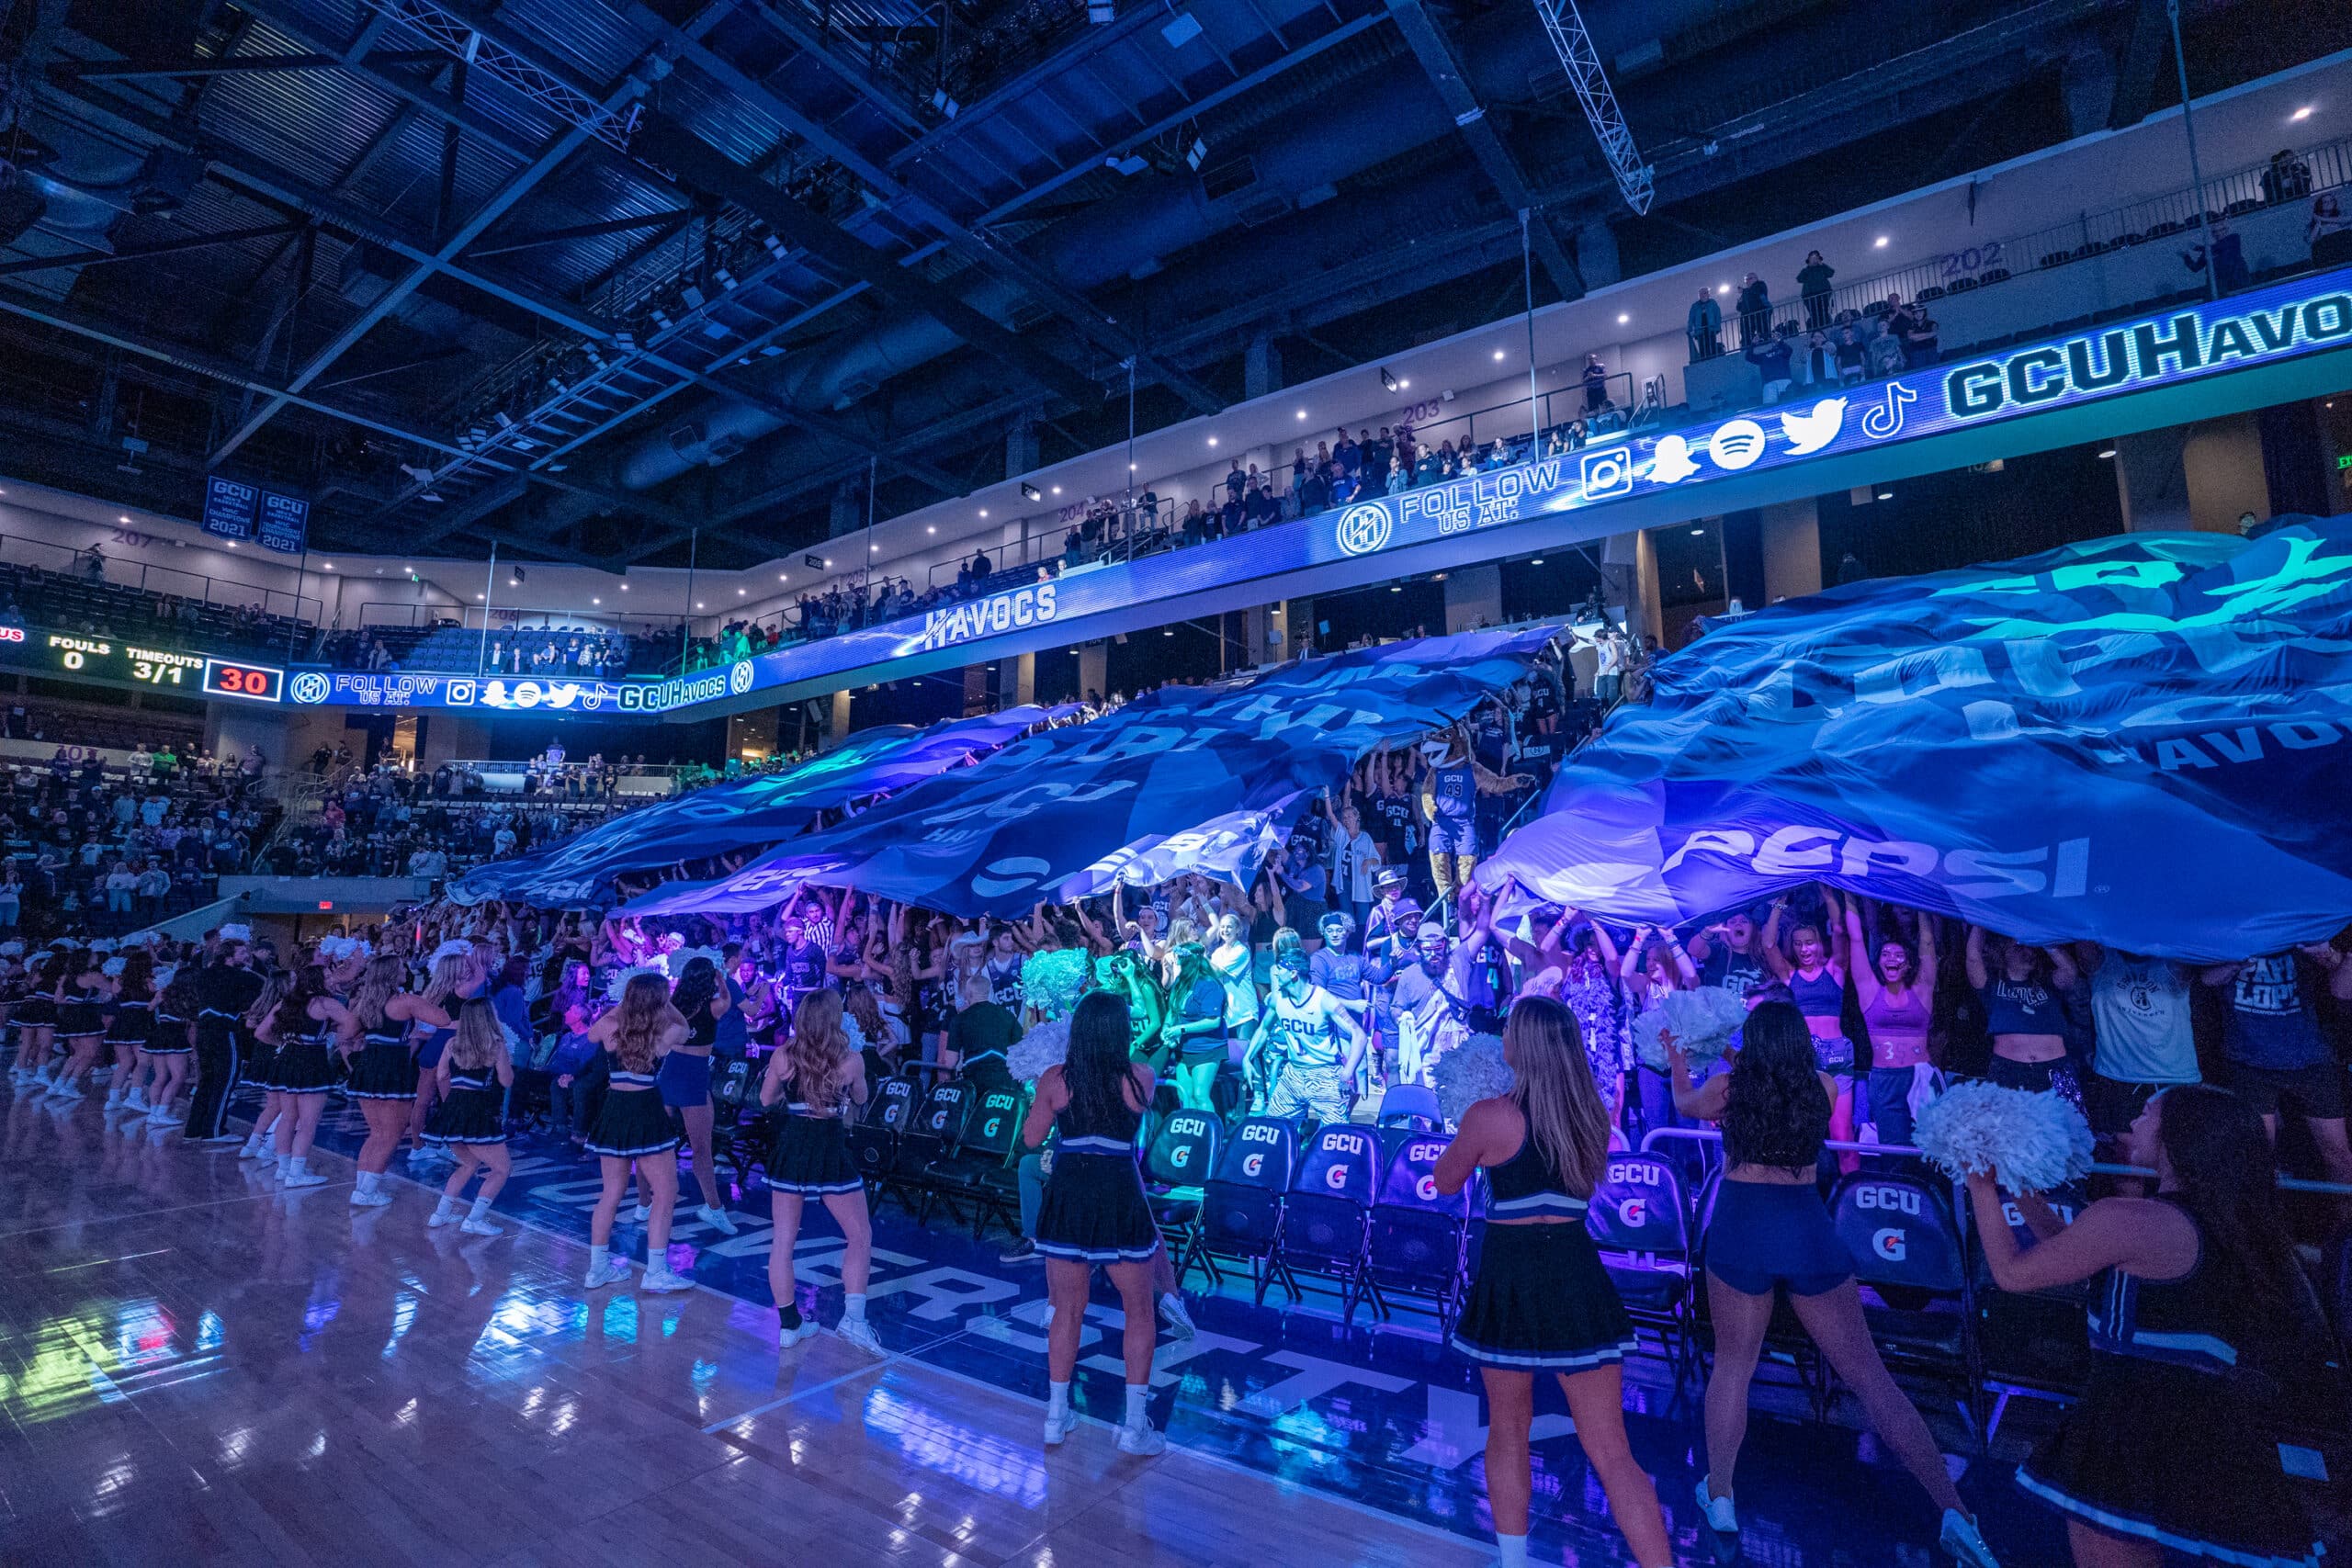 As colorful lights flash in the dark arena, the GCU Havocs student section cheers loudly and waves large banners as part of their electric pre-game atmosphere.